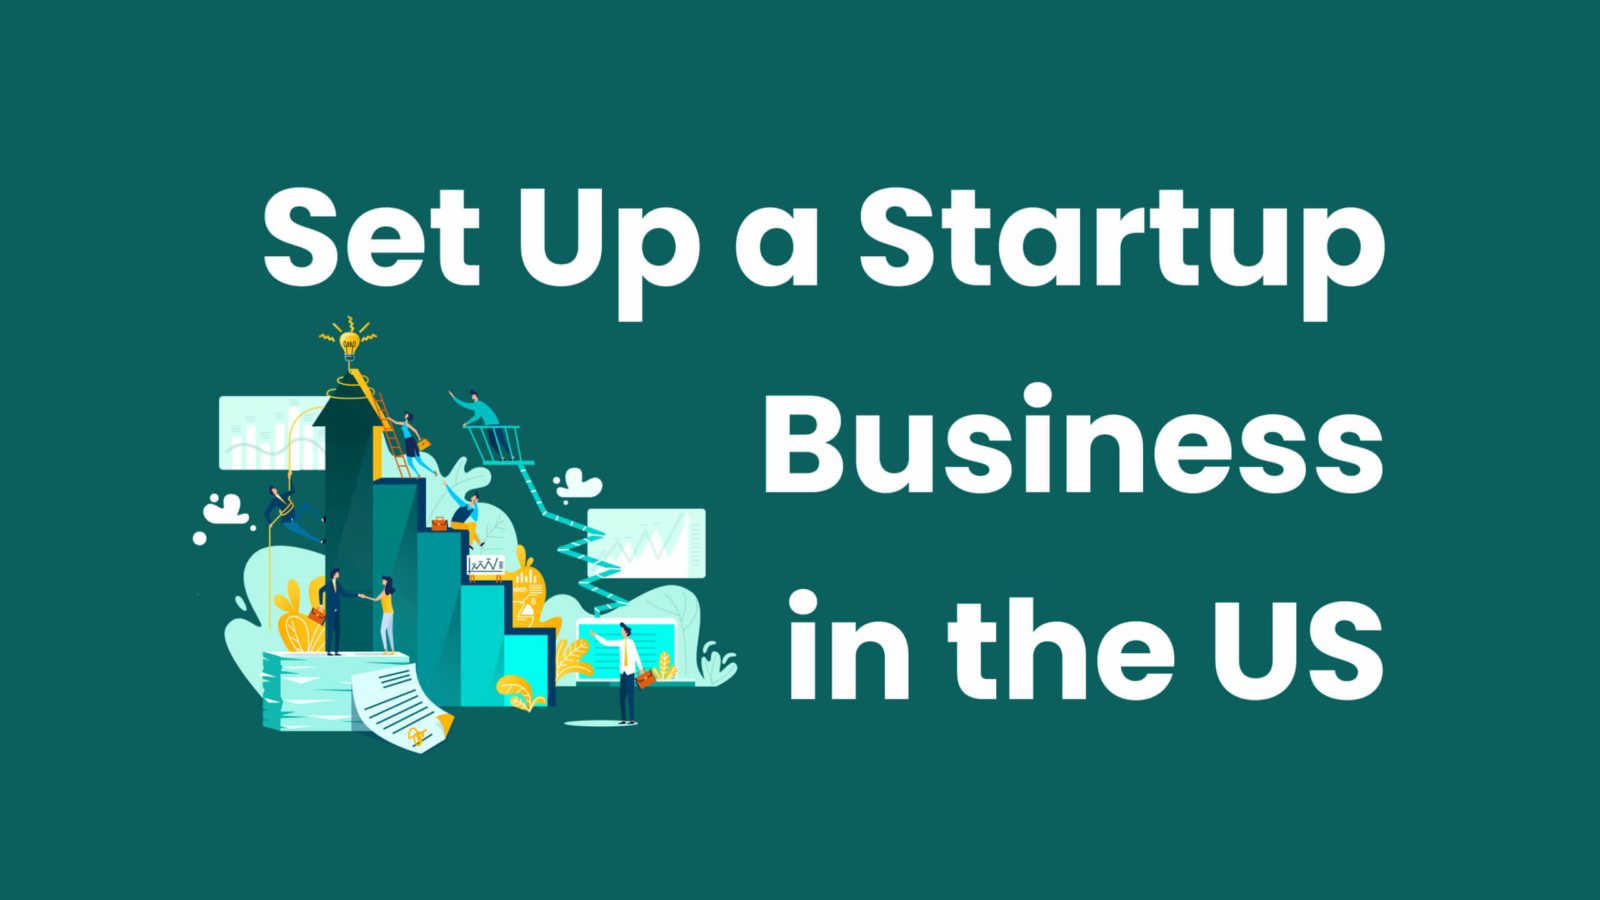 Set Up a Startup Business in the US